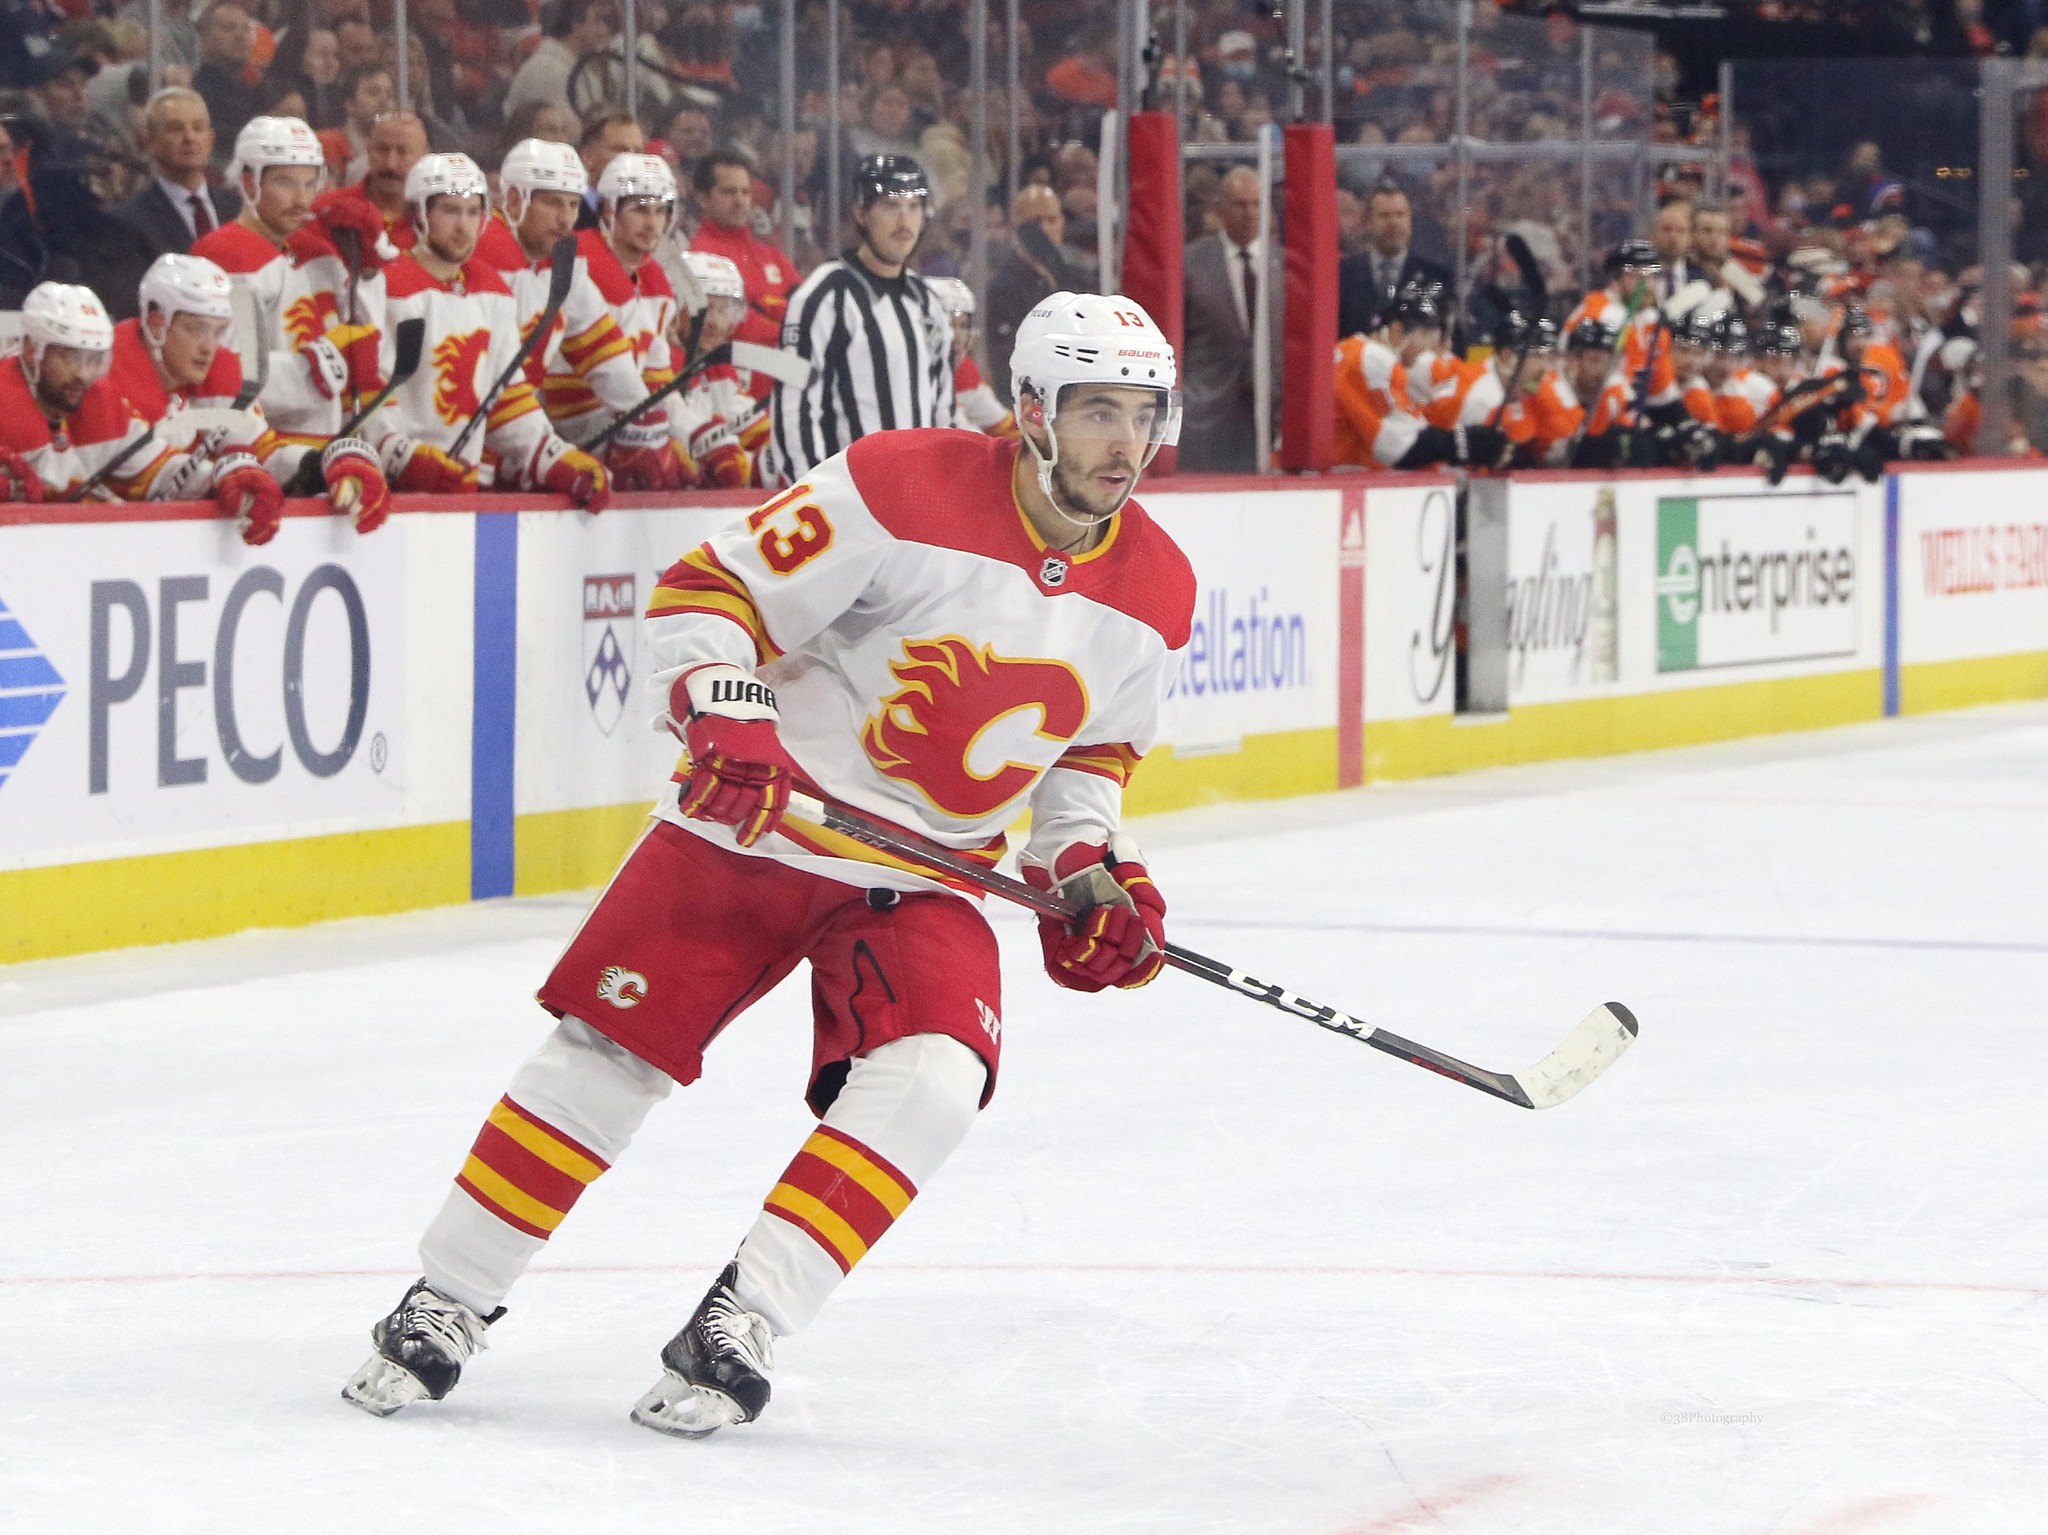 3 Takeaways From the Flames’ Bounceback Win Over the Panthers